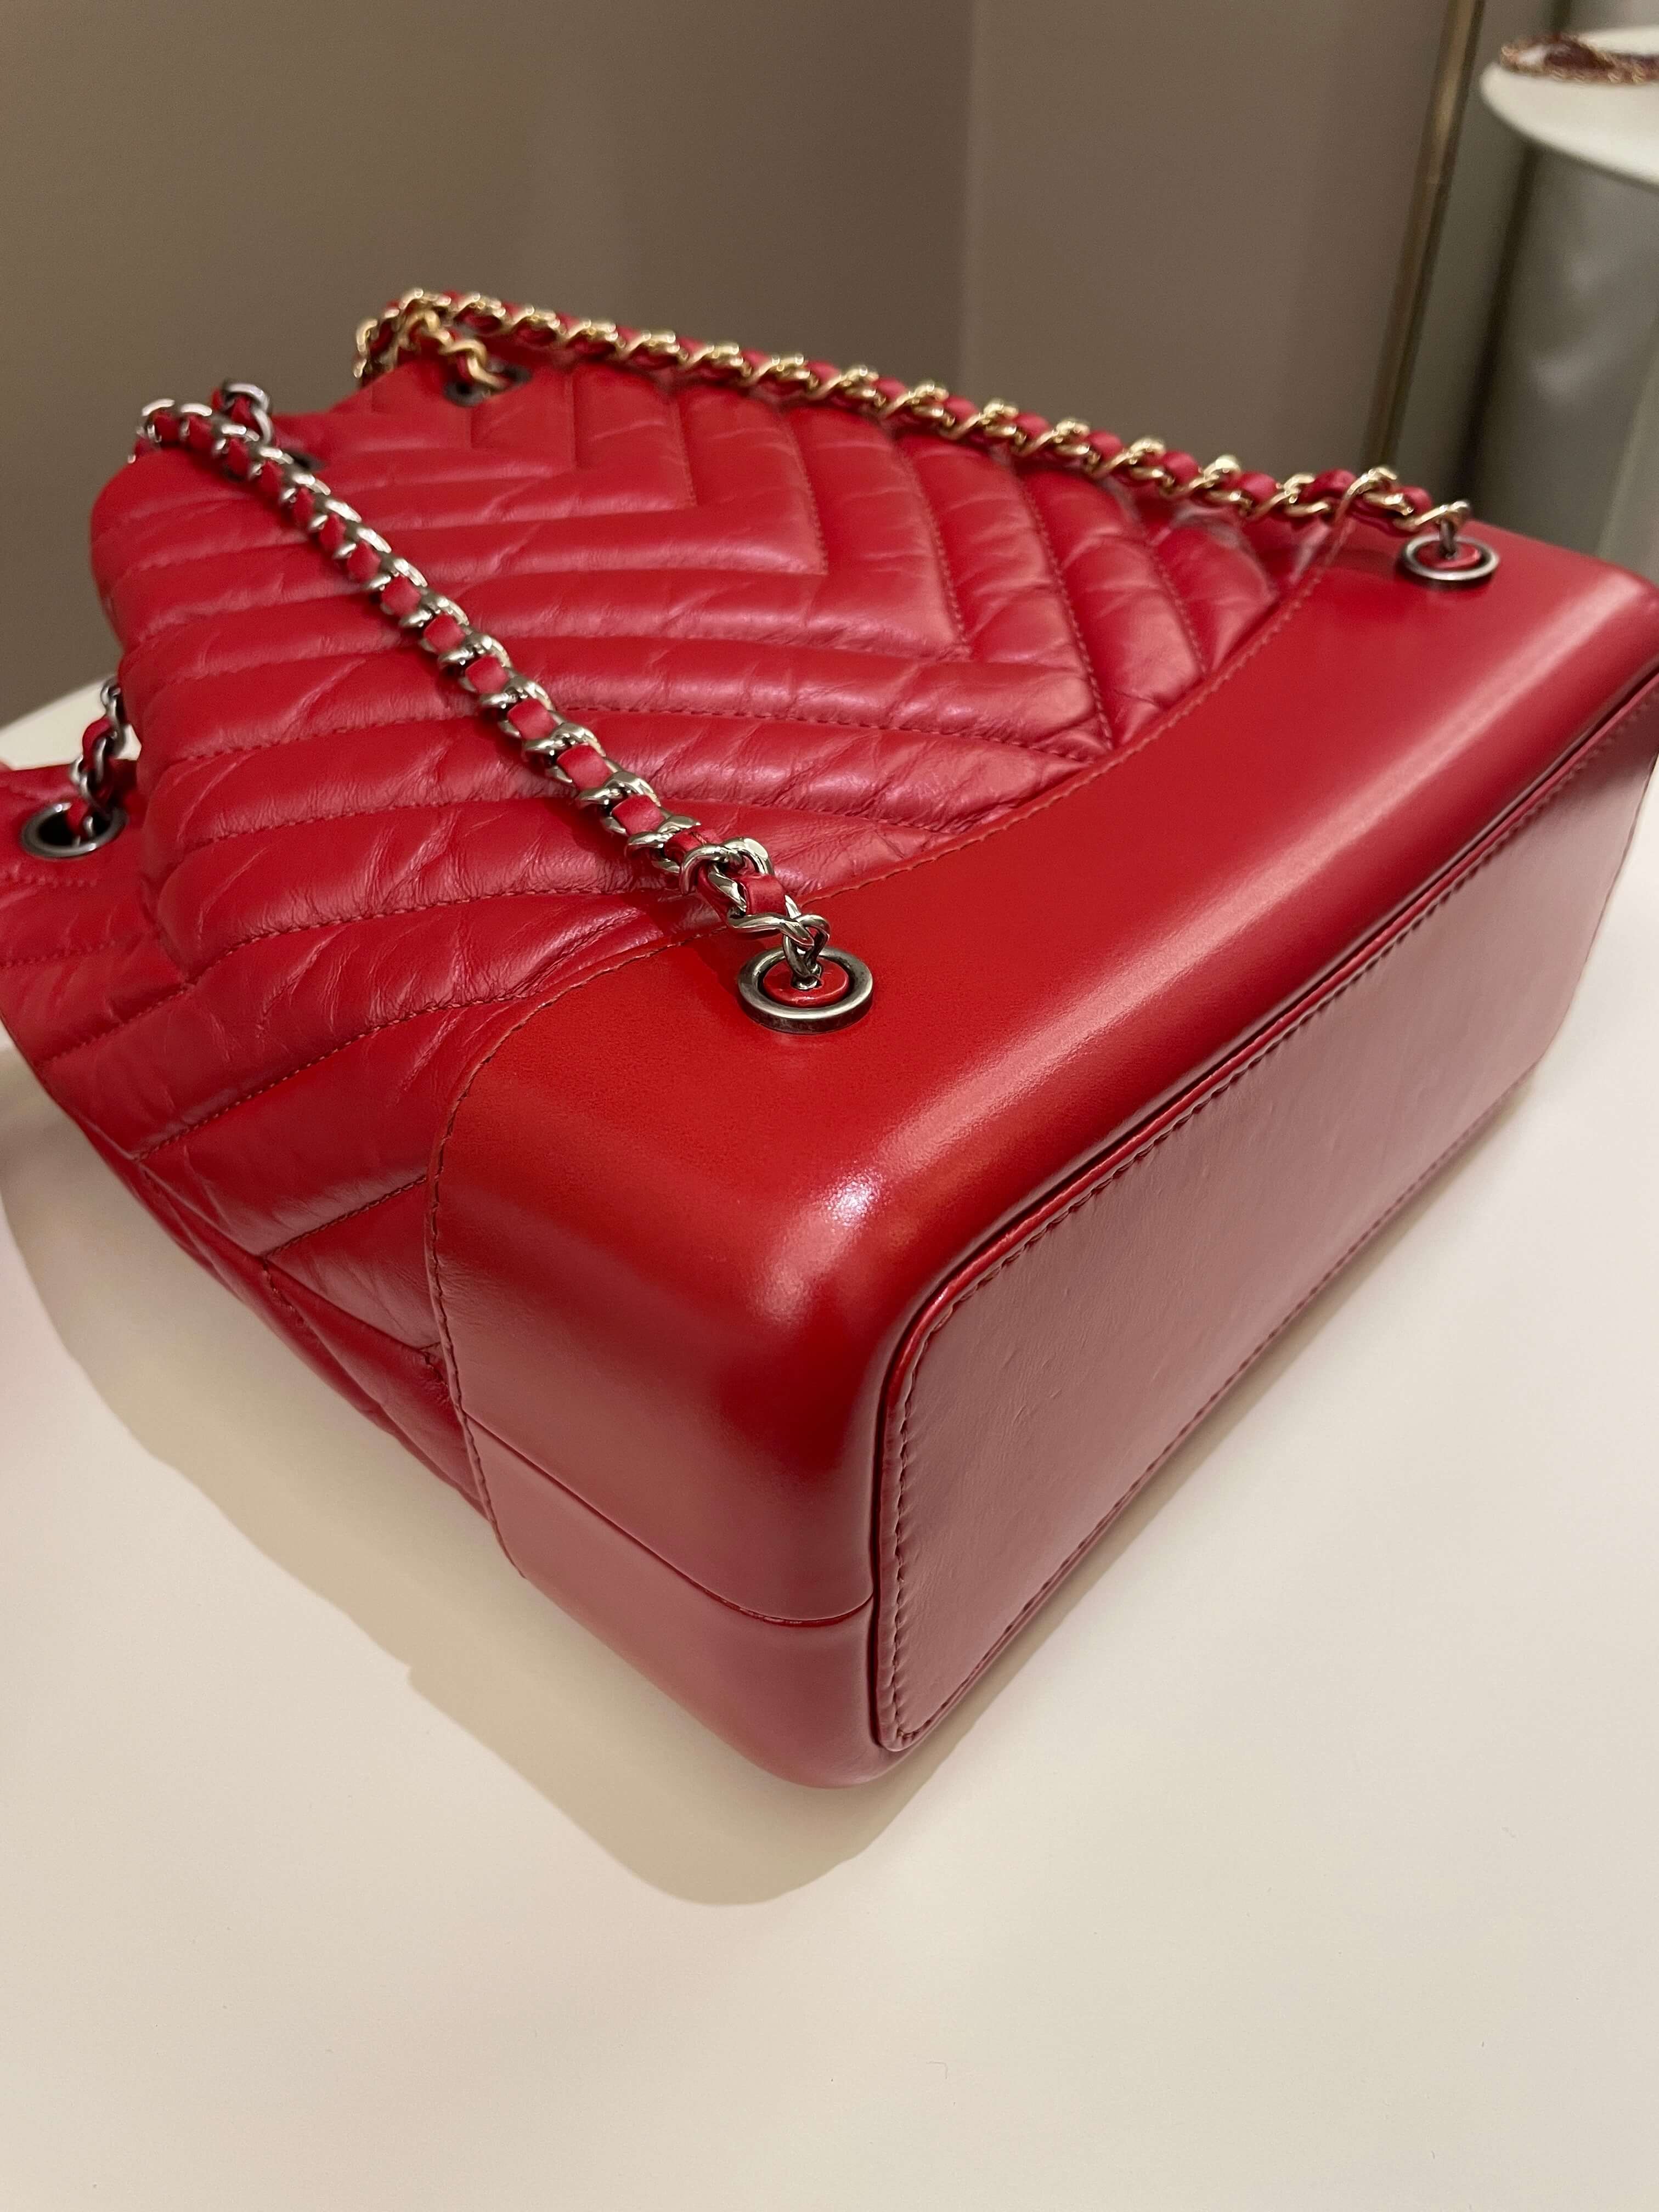 Chanel Chevron Gabrielle Backpack Red Aged Calfskin